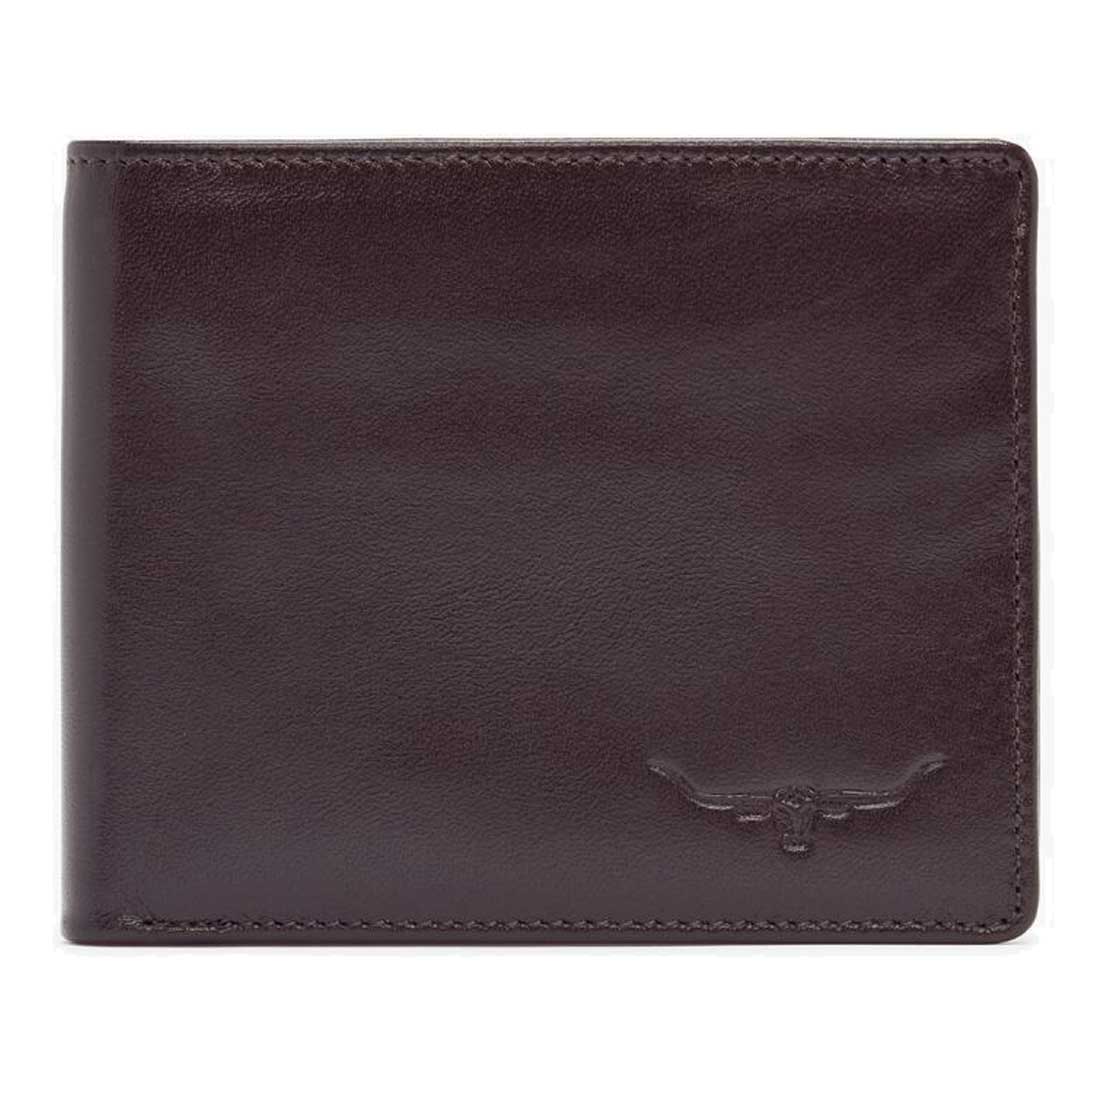 RM WILLIAMS Tri Fold Wallet - Mens Yearling Leather - Chestnut